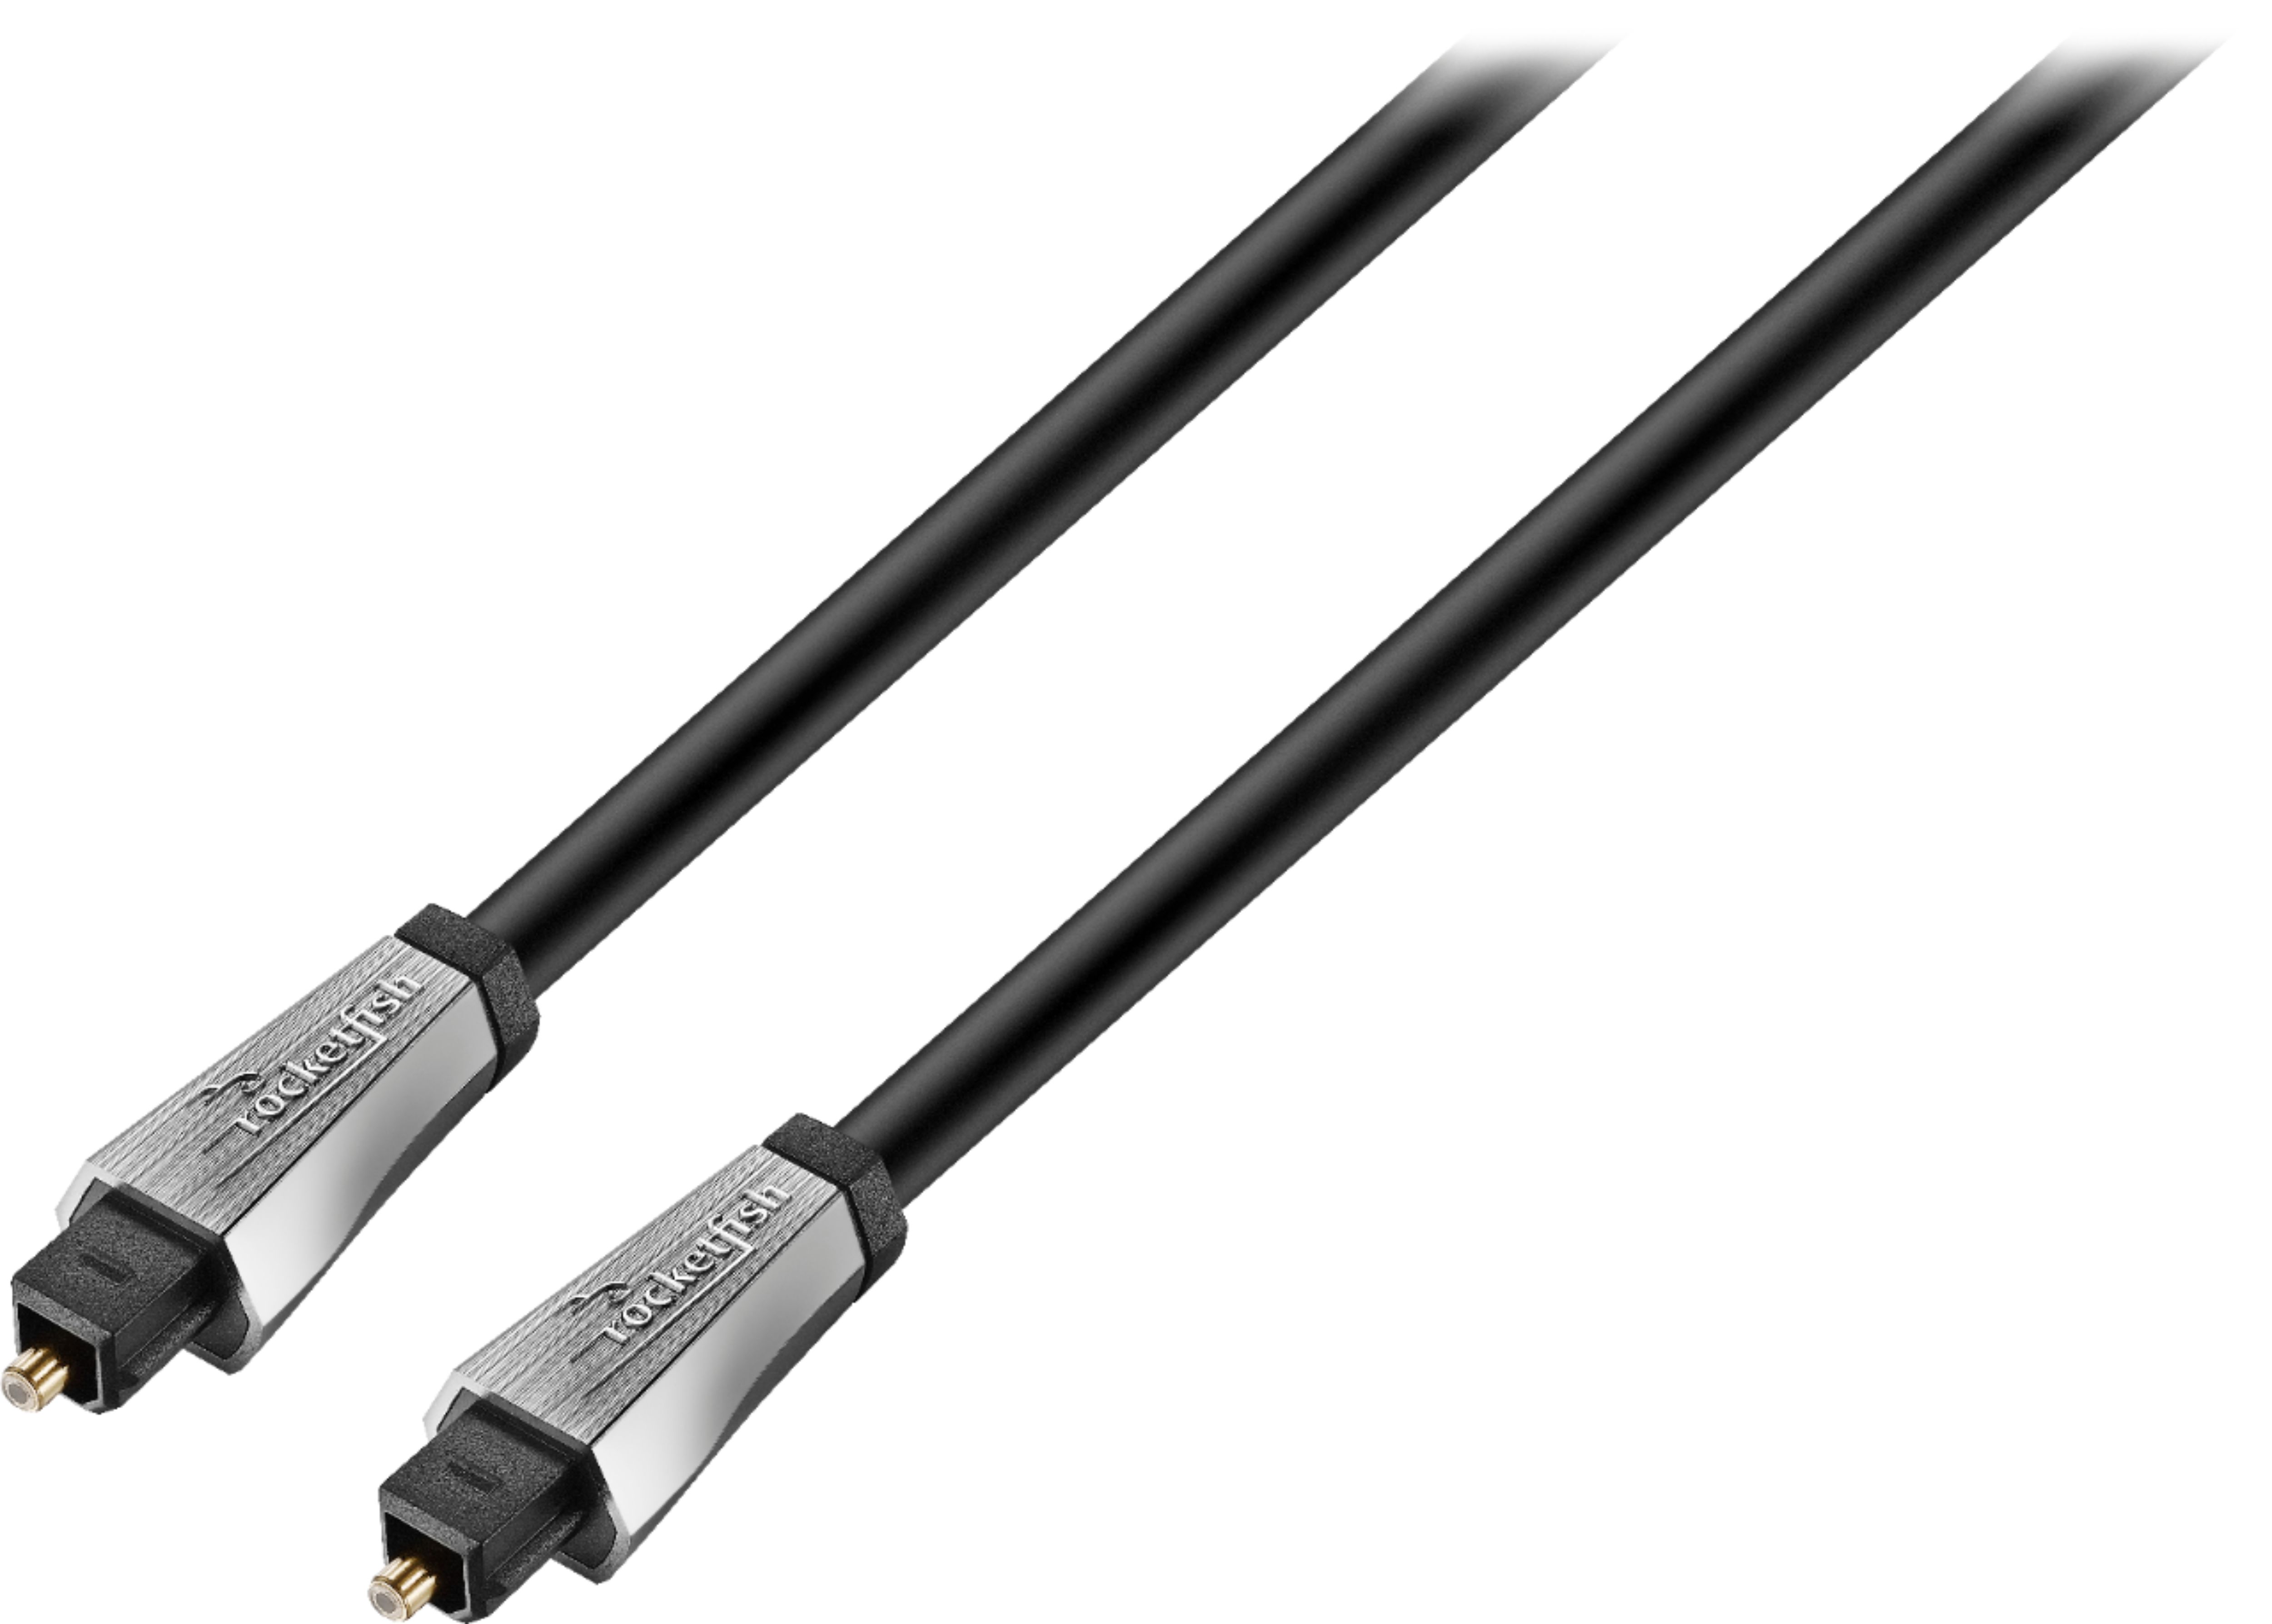 TOSLINK Cable, Optical Audio Cable – 25 feet Long Fiber Optic Cable for  soundbars (TOSLINK to TOSLINK, Digital S/PDIF Cable, Stereo